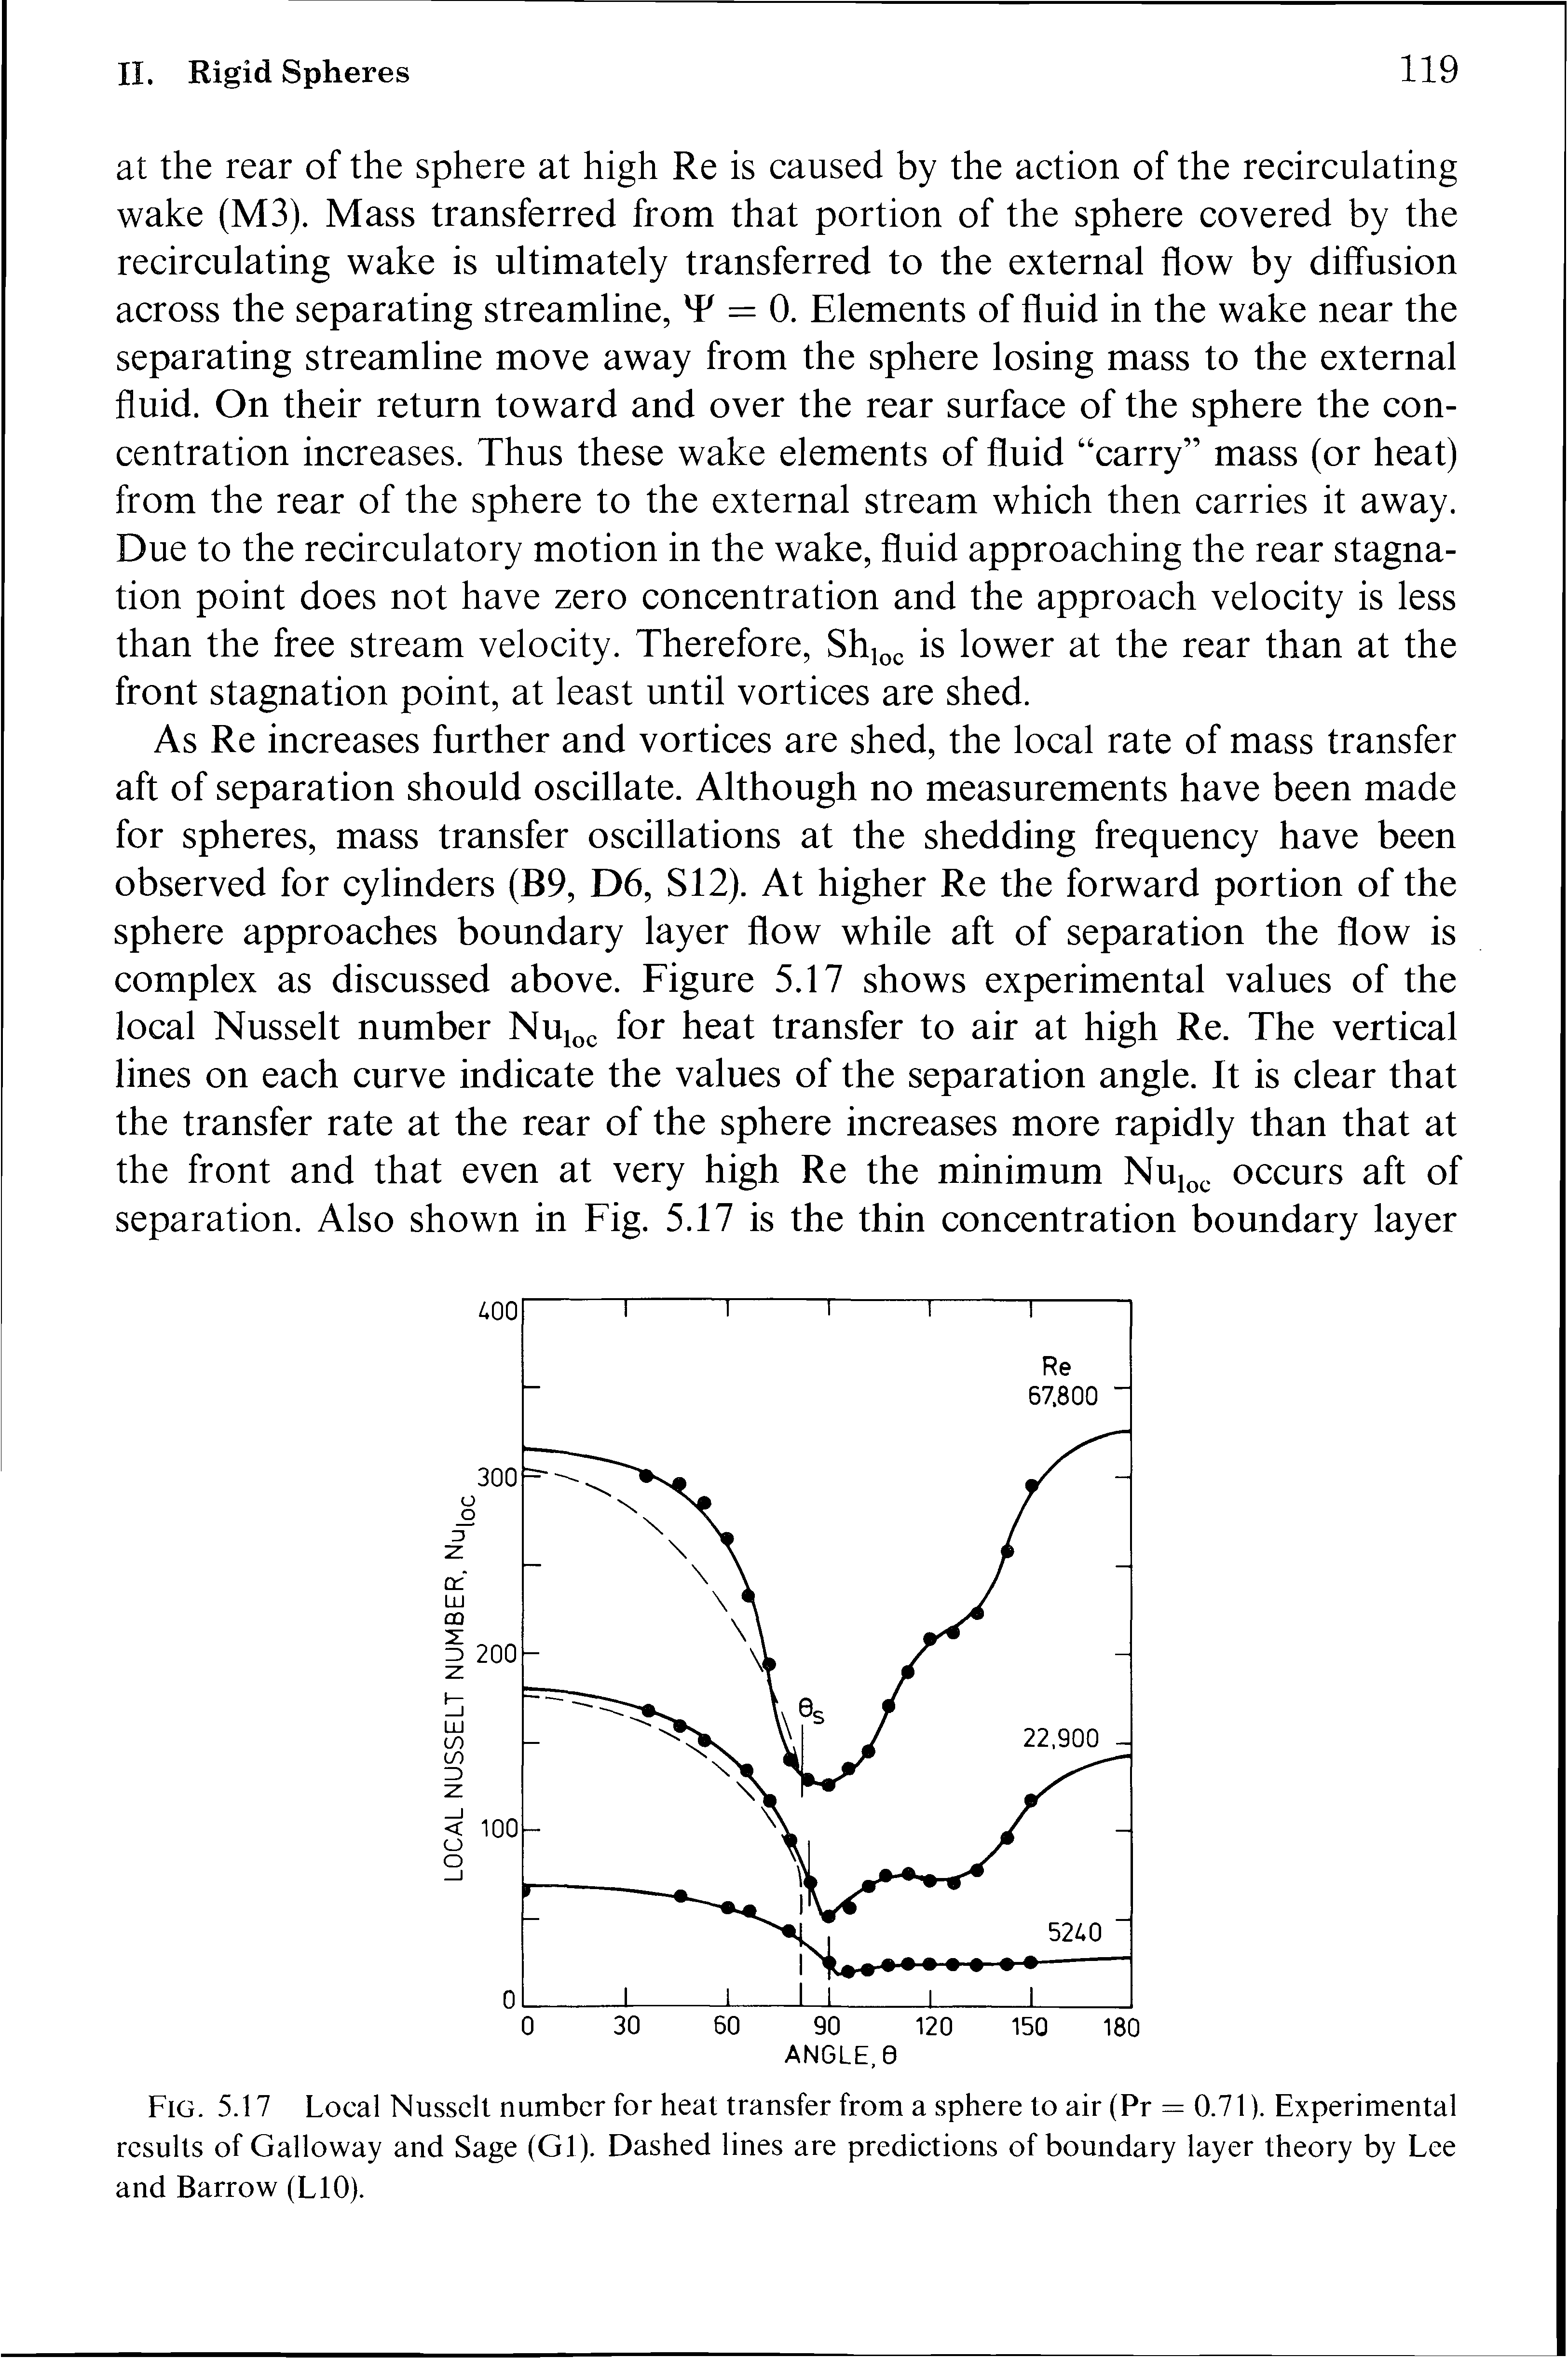 Fig. 5.17 Local Nusselt number for heat transfer from a sphere to air (Pr = 0.71). Experimental results of Galloway and Sage (Gl). Dashed lines are predictions of boundary layer theory by Lee and Barrow (LIO).